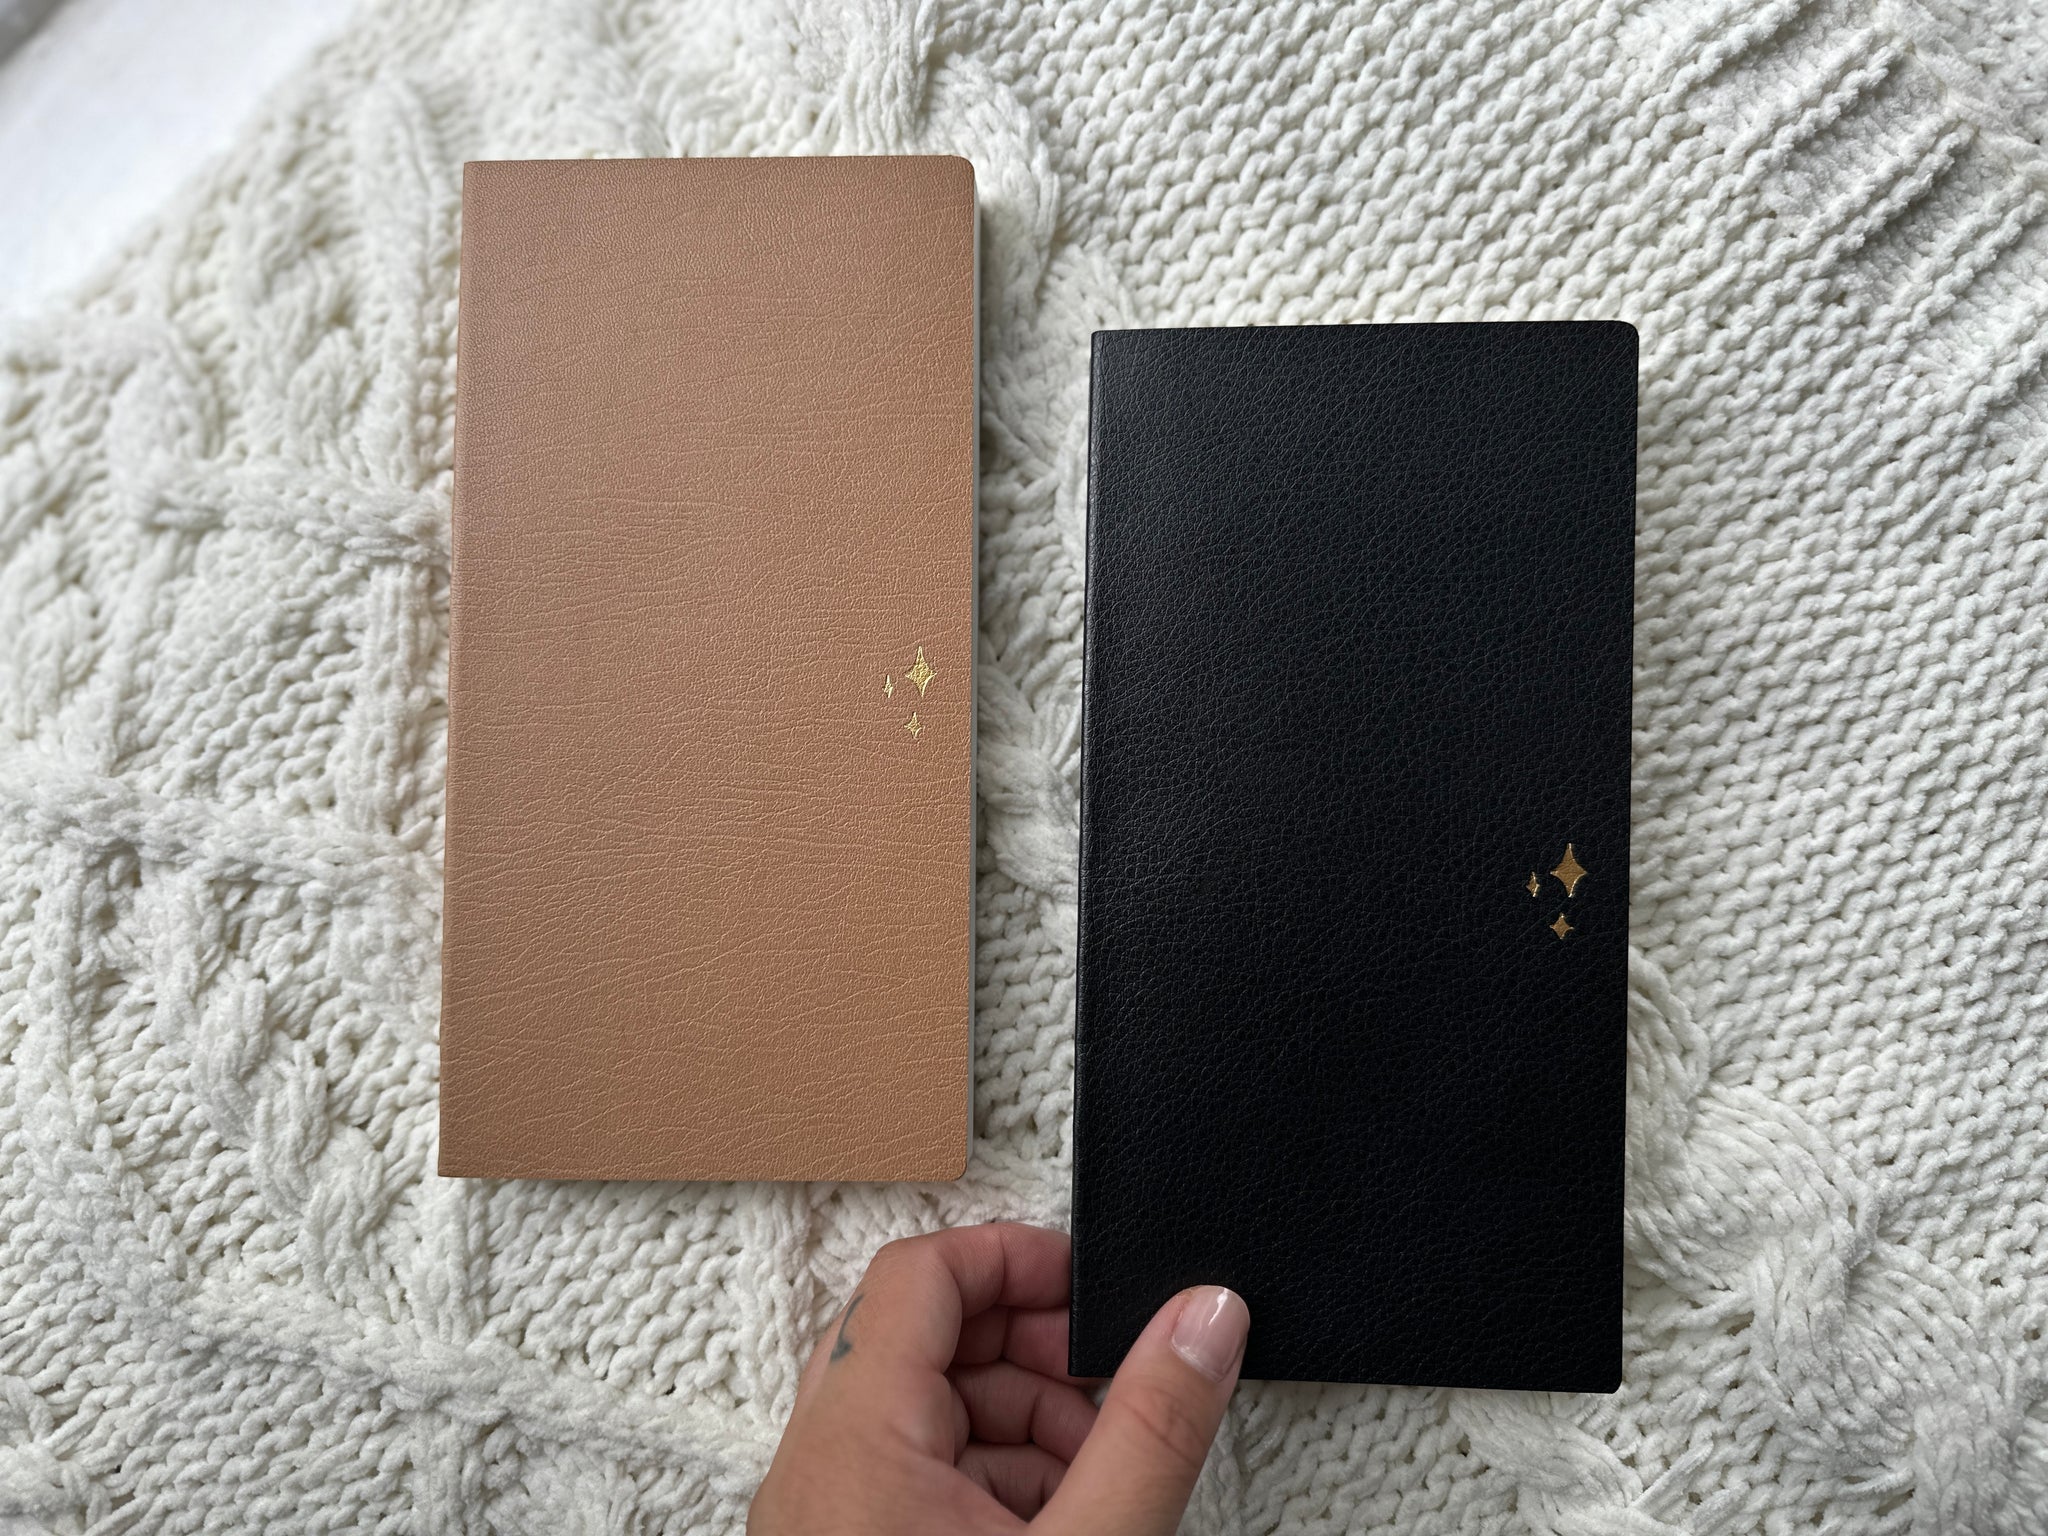 The OG Weekly Diary Planner